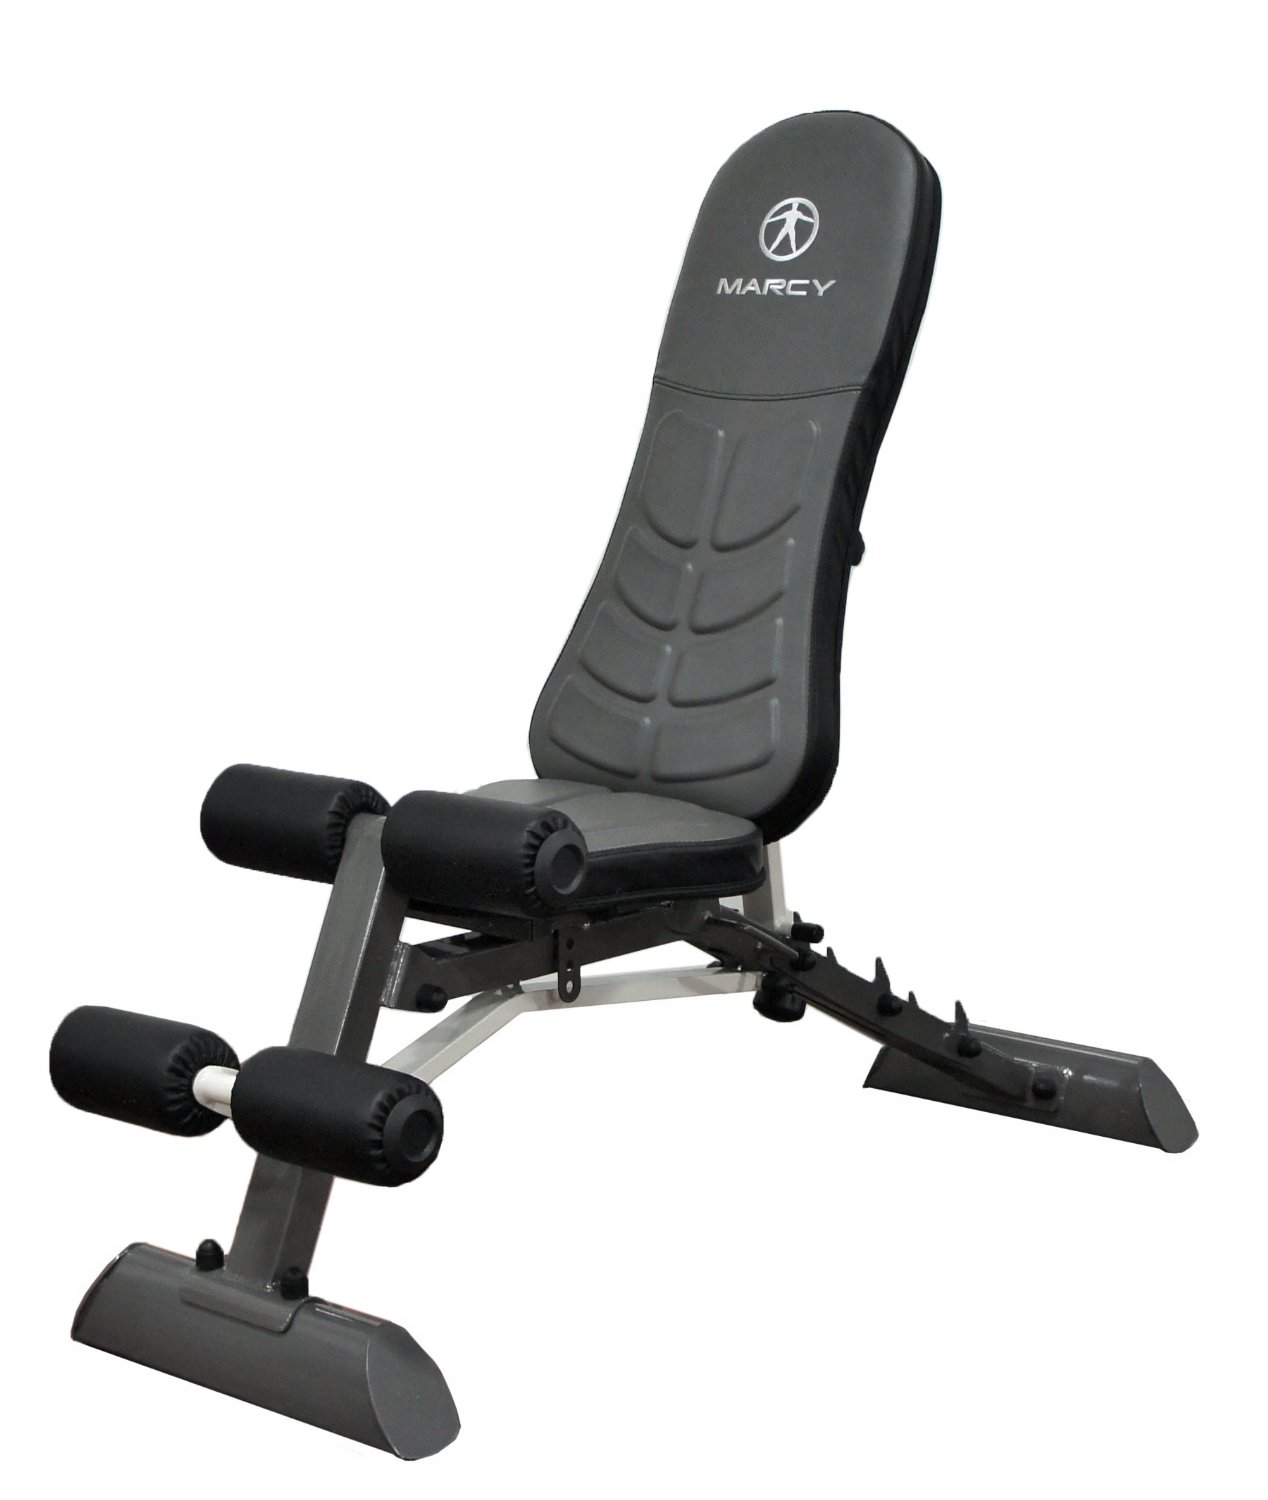 Marcy Deluxe Utility Bench SB-10100